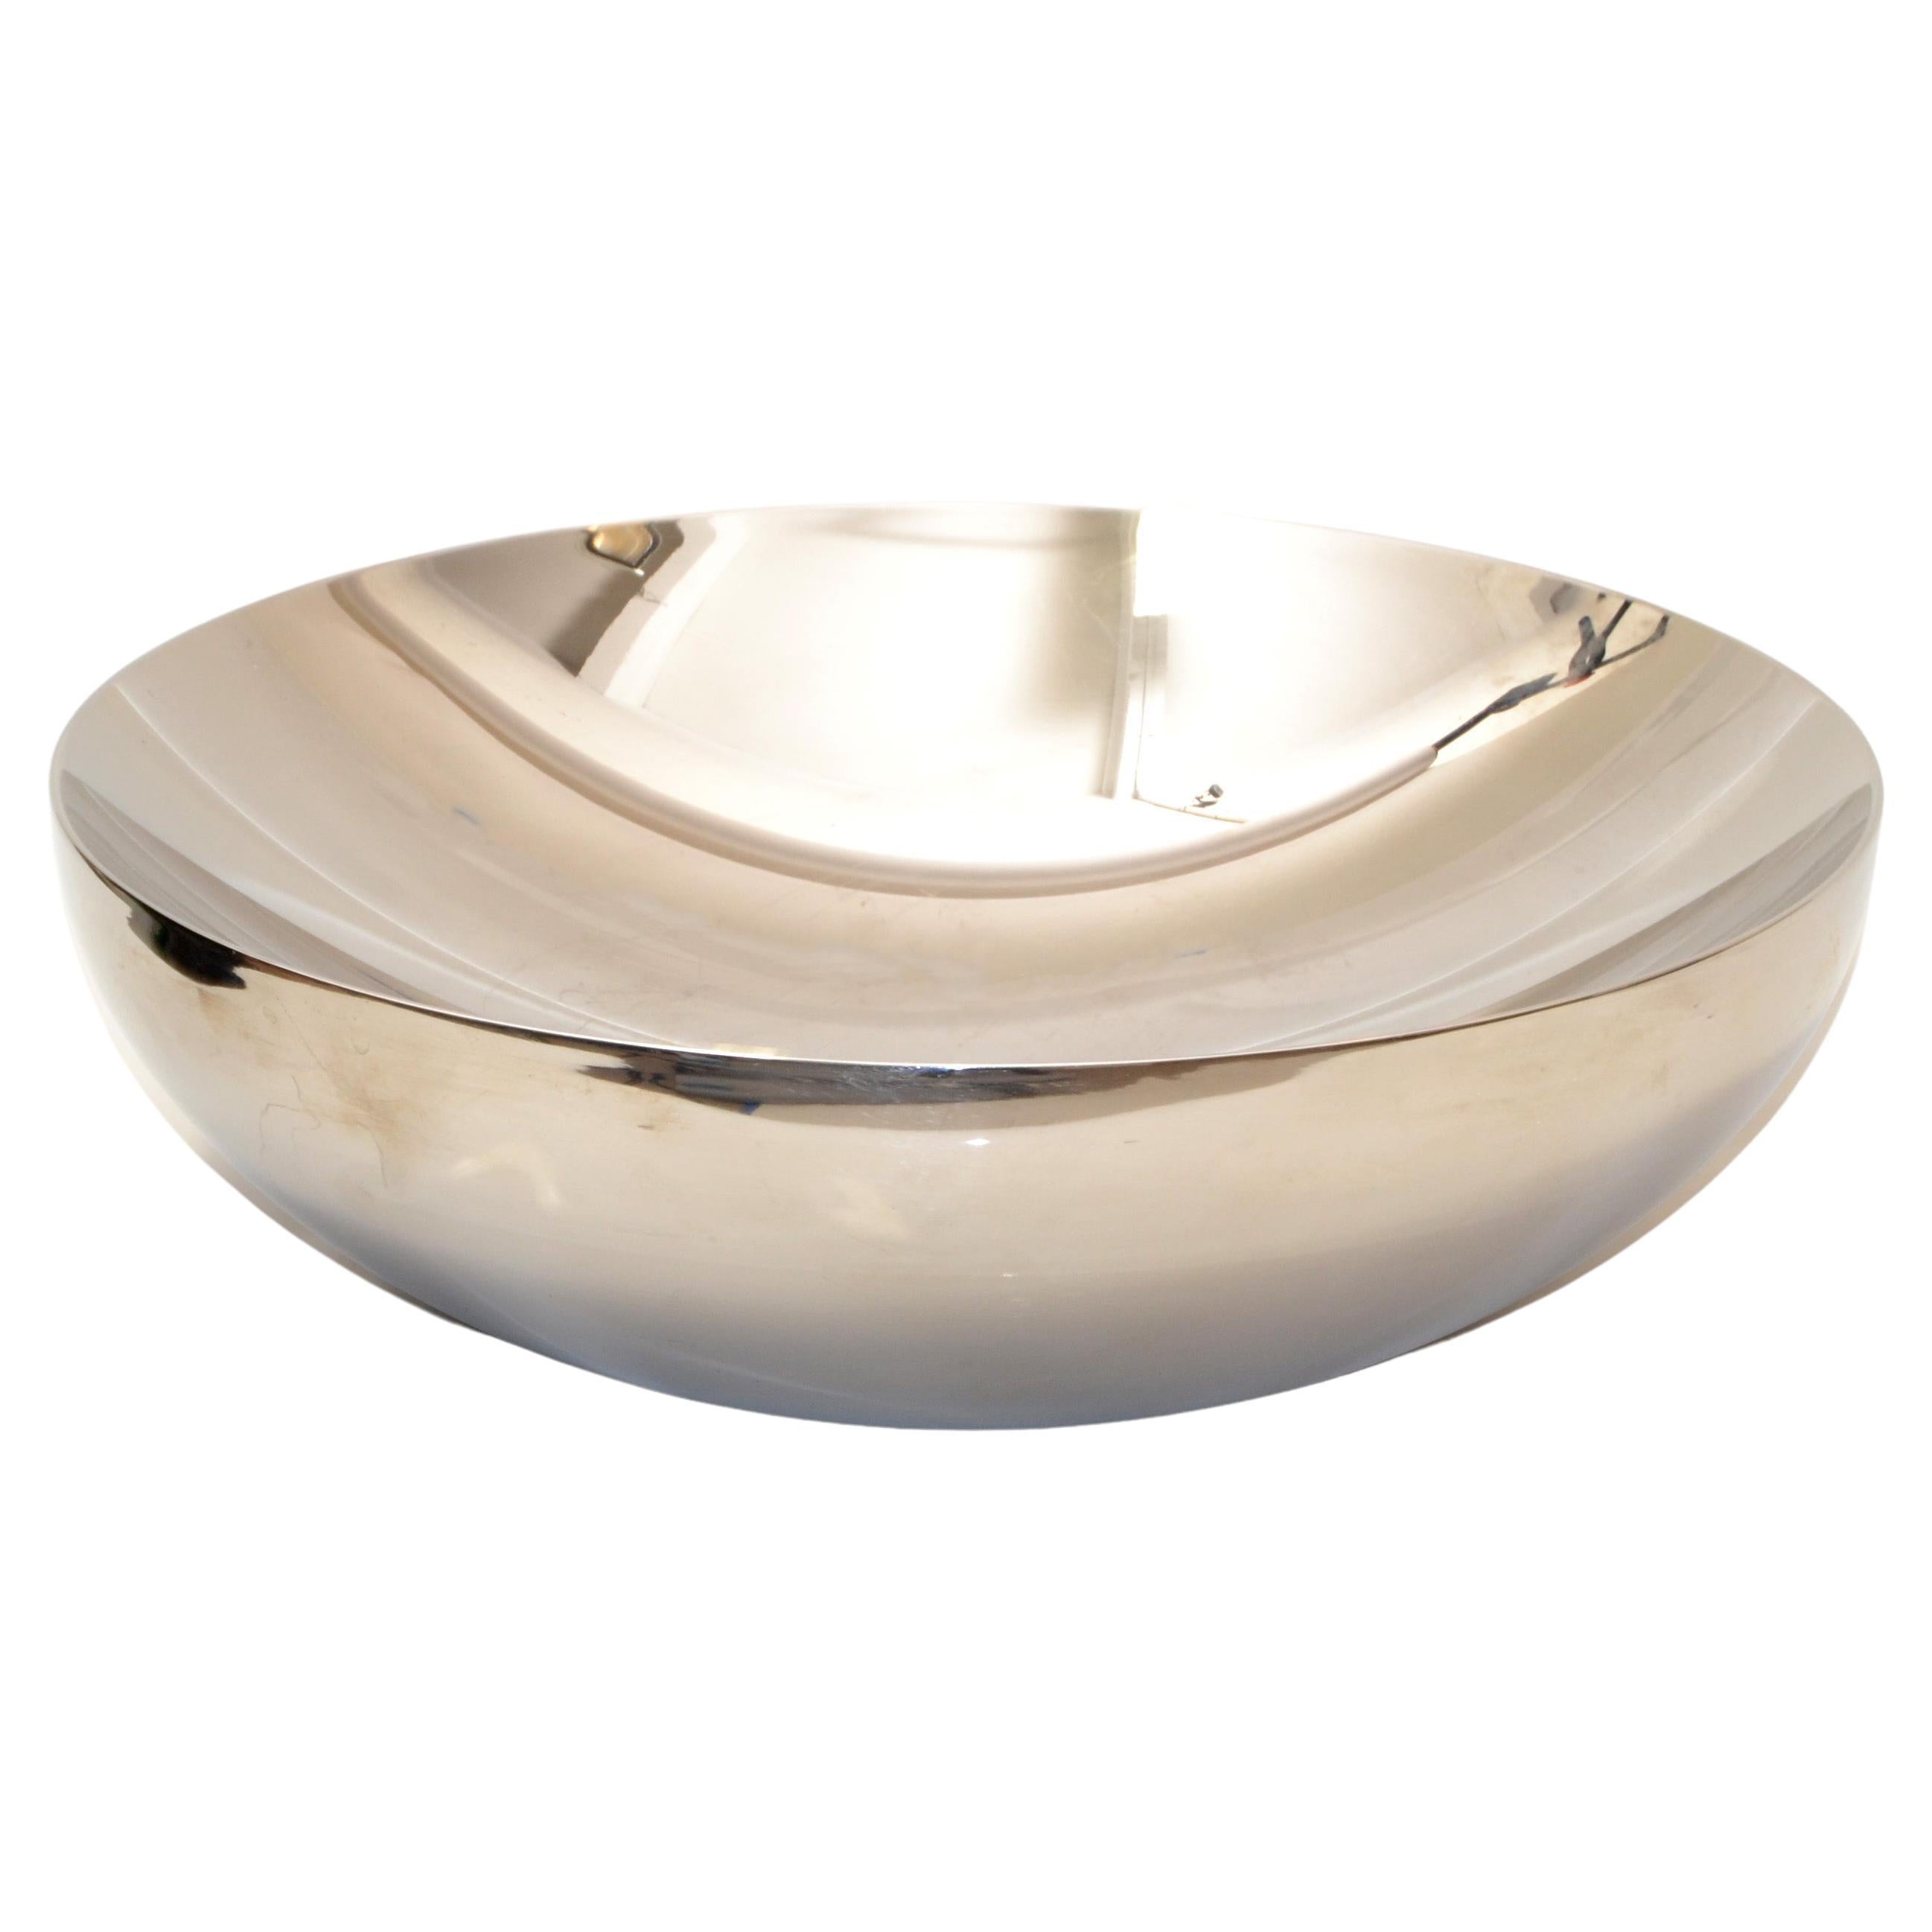 Alessi Durbino Lomazzi Inox 18/10 Stainless Steel Double Wall Serving Bowl Italy For Sale